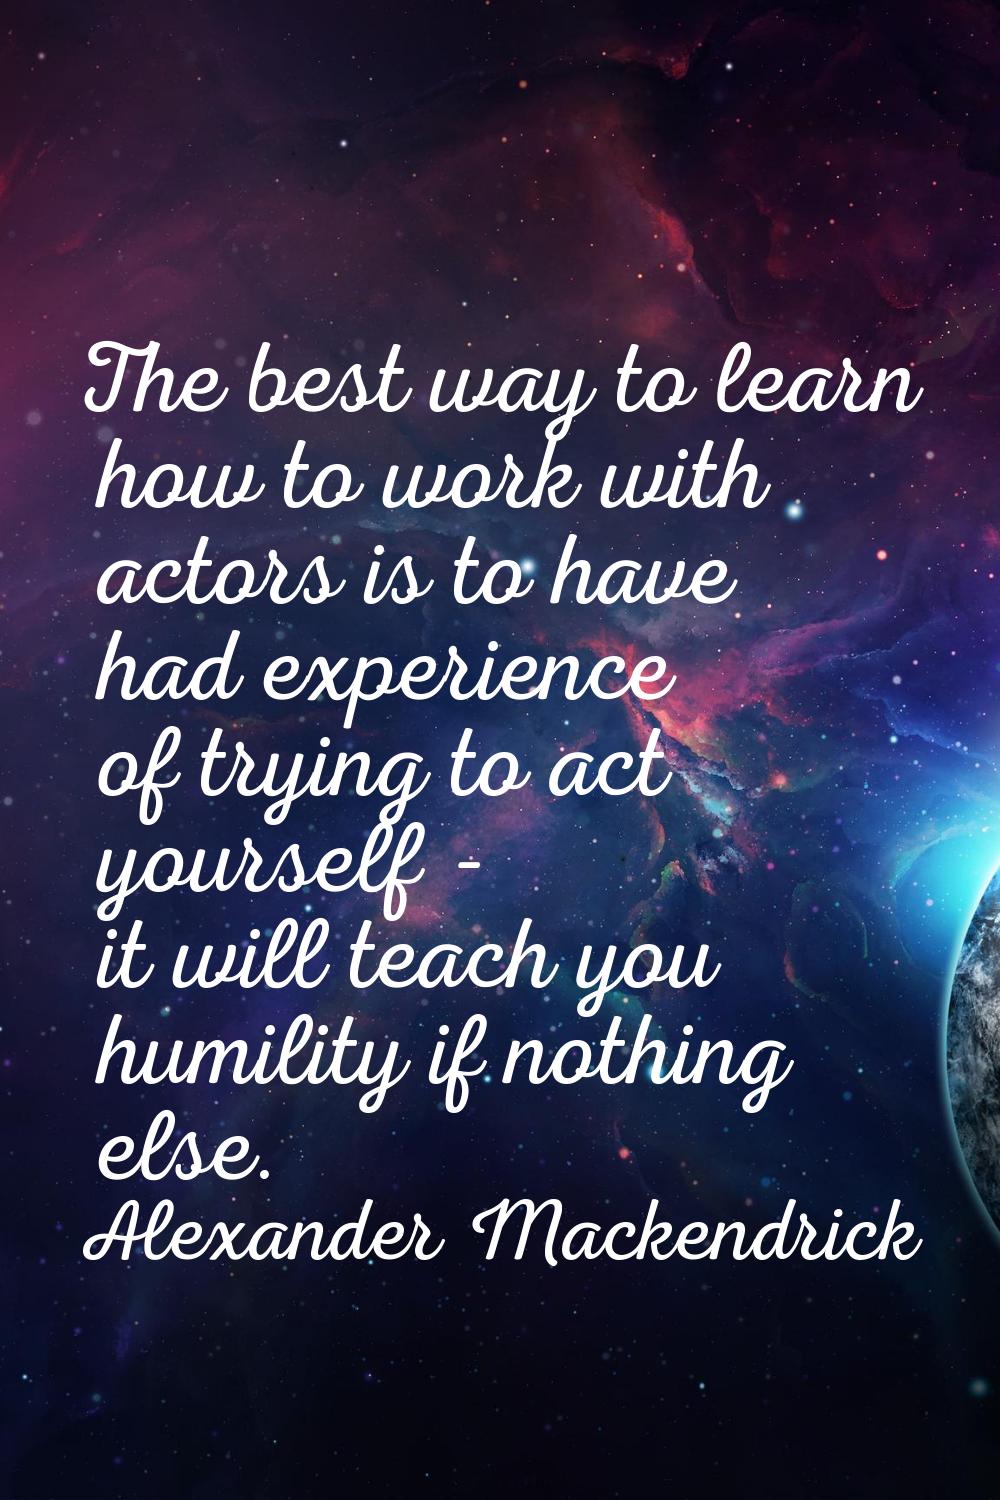 The best way to learn how to work with actors is to have had experience of trying to act yourself -